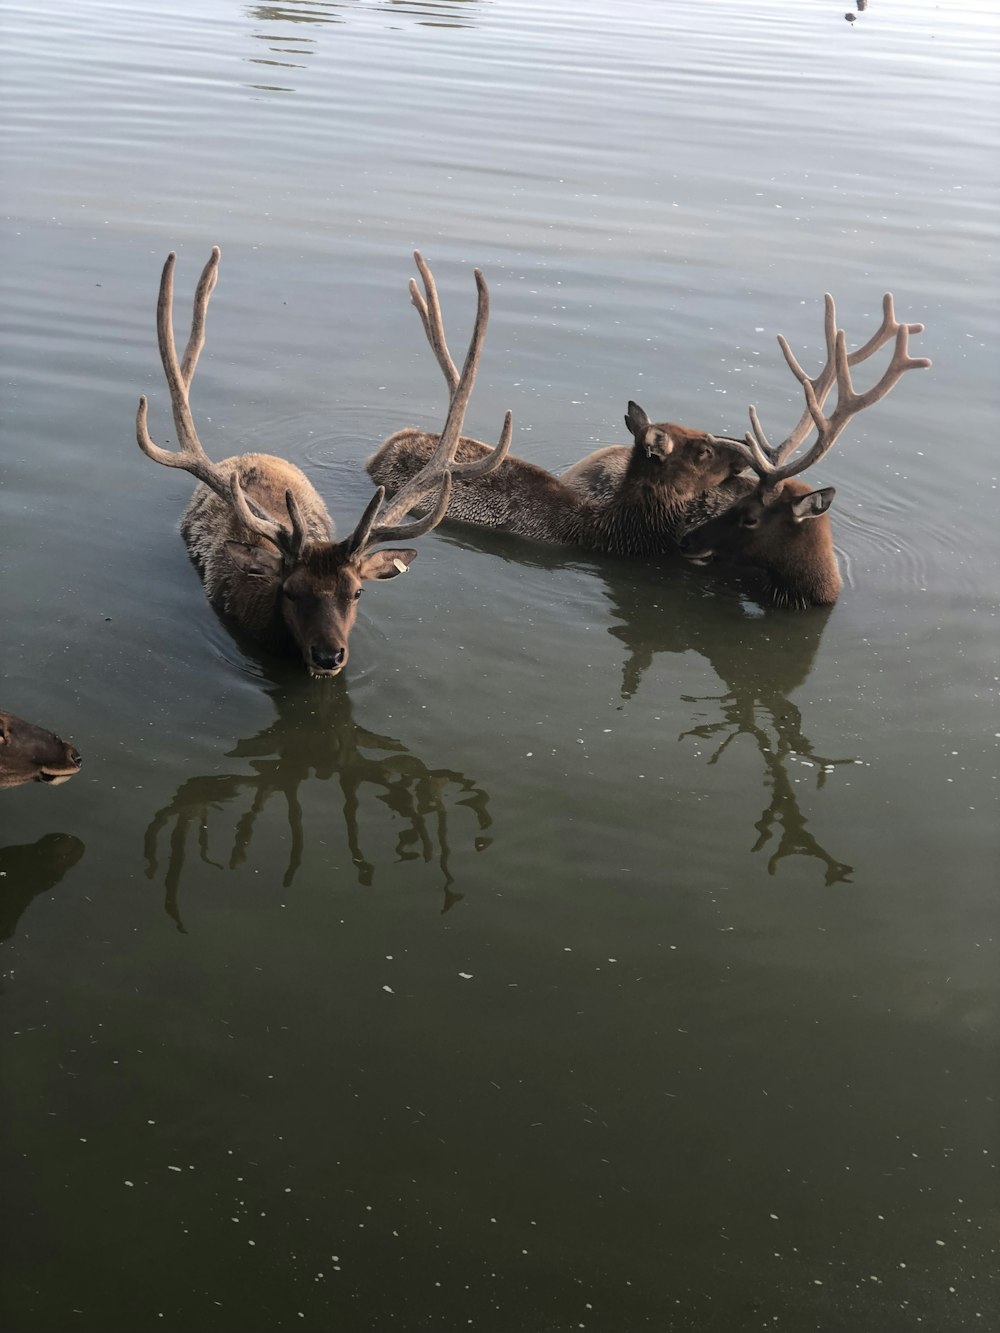 a group of deer swimming in a body of water